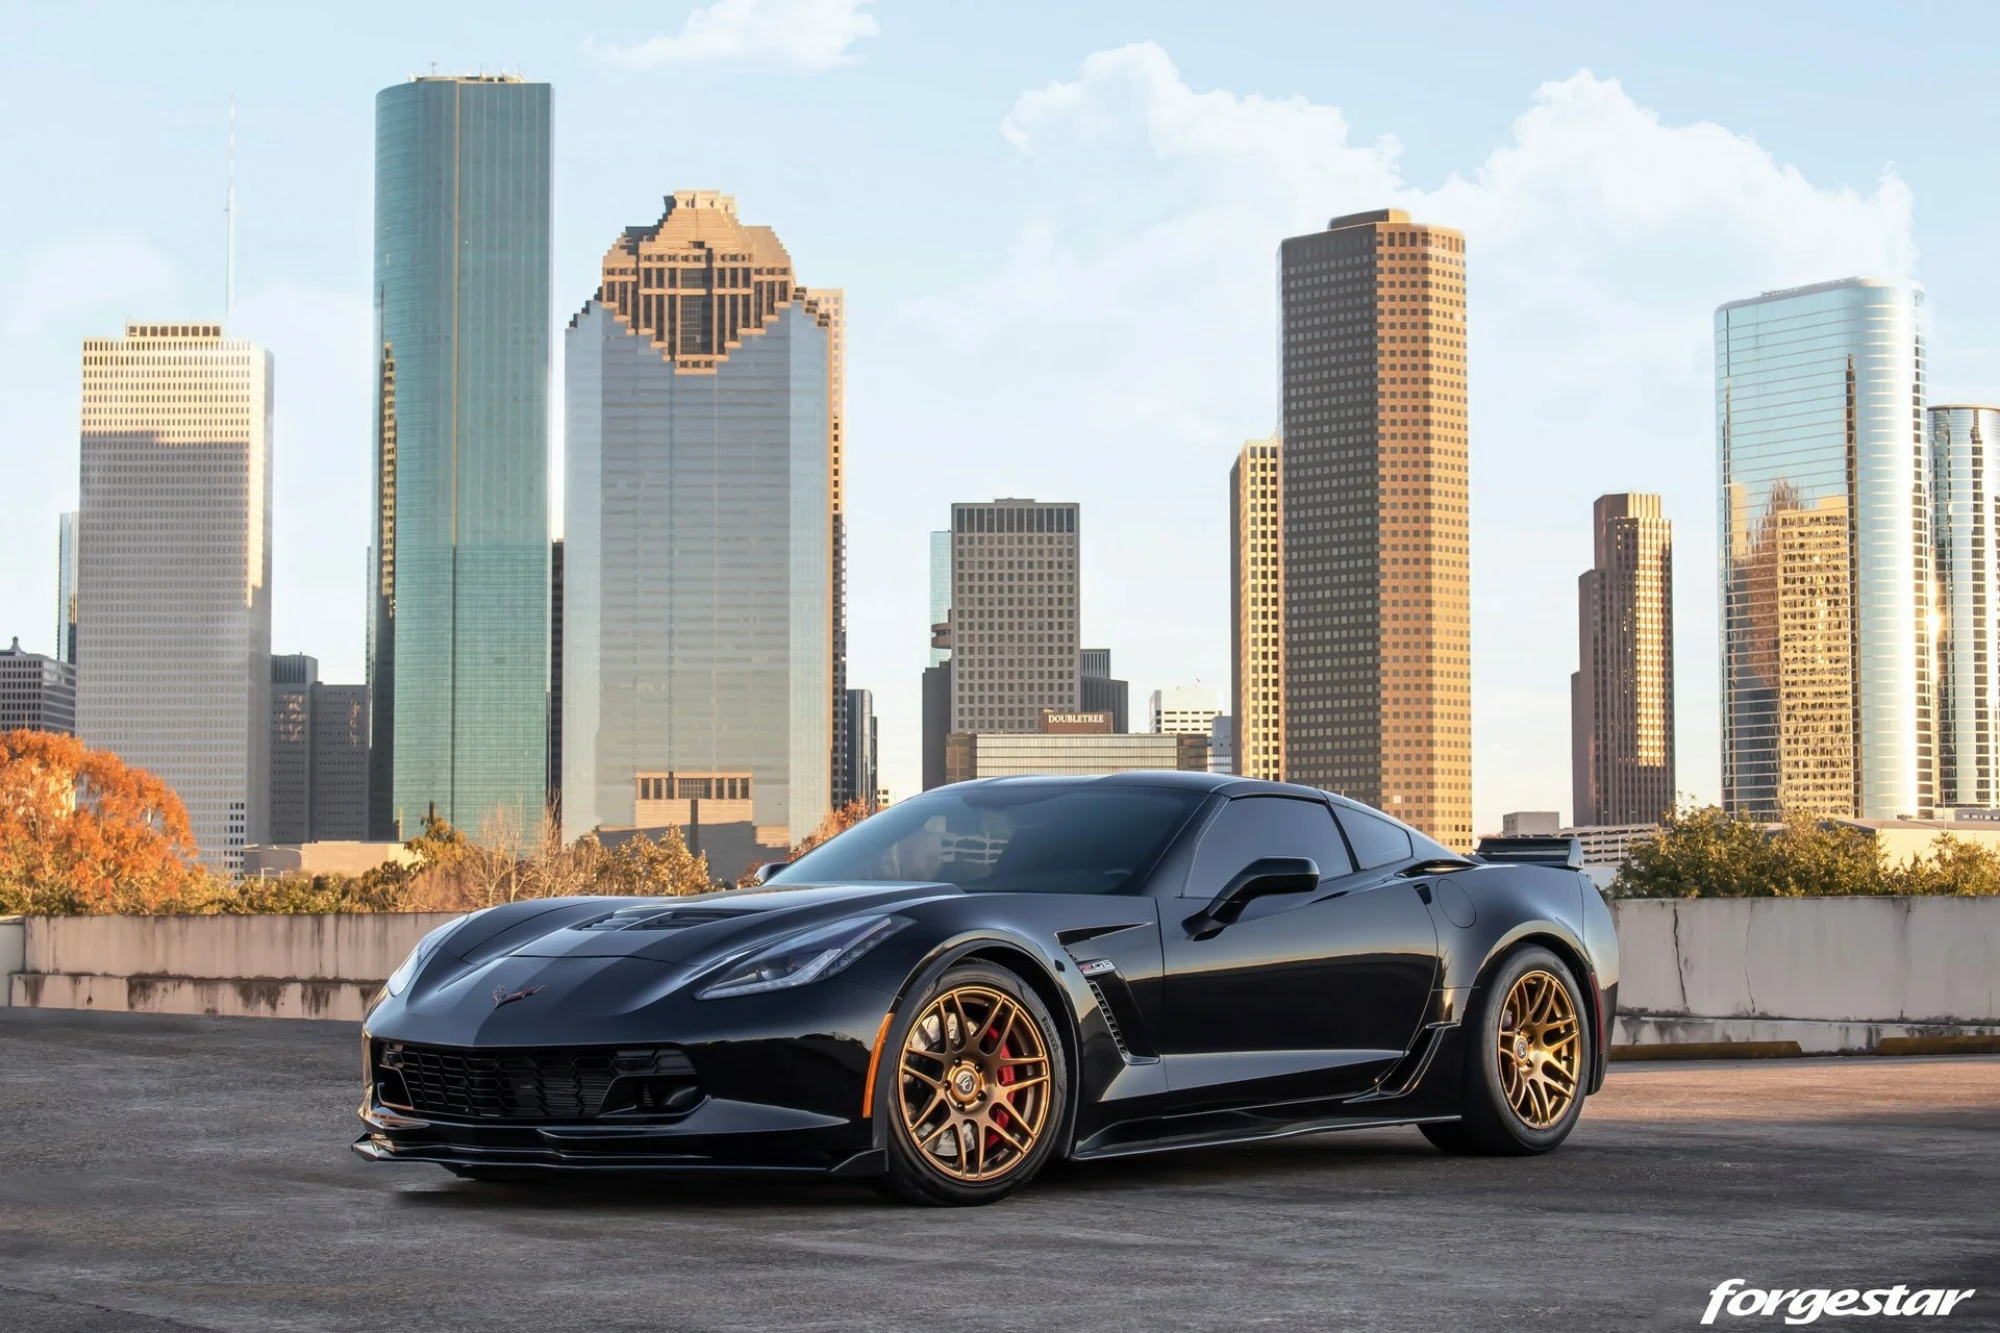 https://mwcompany-forgestar.files.svdcdn.com/production/galleryImages/_2000xAUTO_fit_center-center_90_none/17802/texas-c7-z06-corvette-chevy-custom-bronze-wide-forgestar-f14-wheels-concave-rims-a.webp